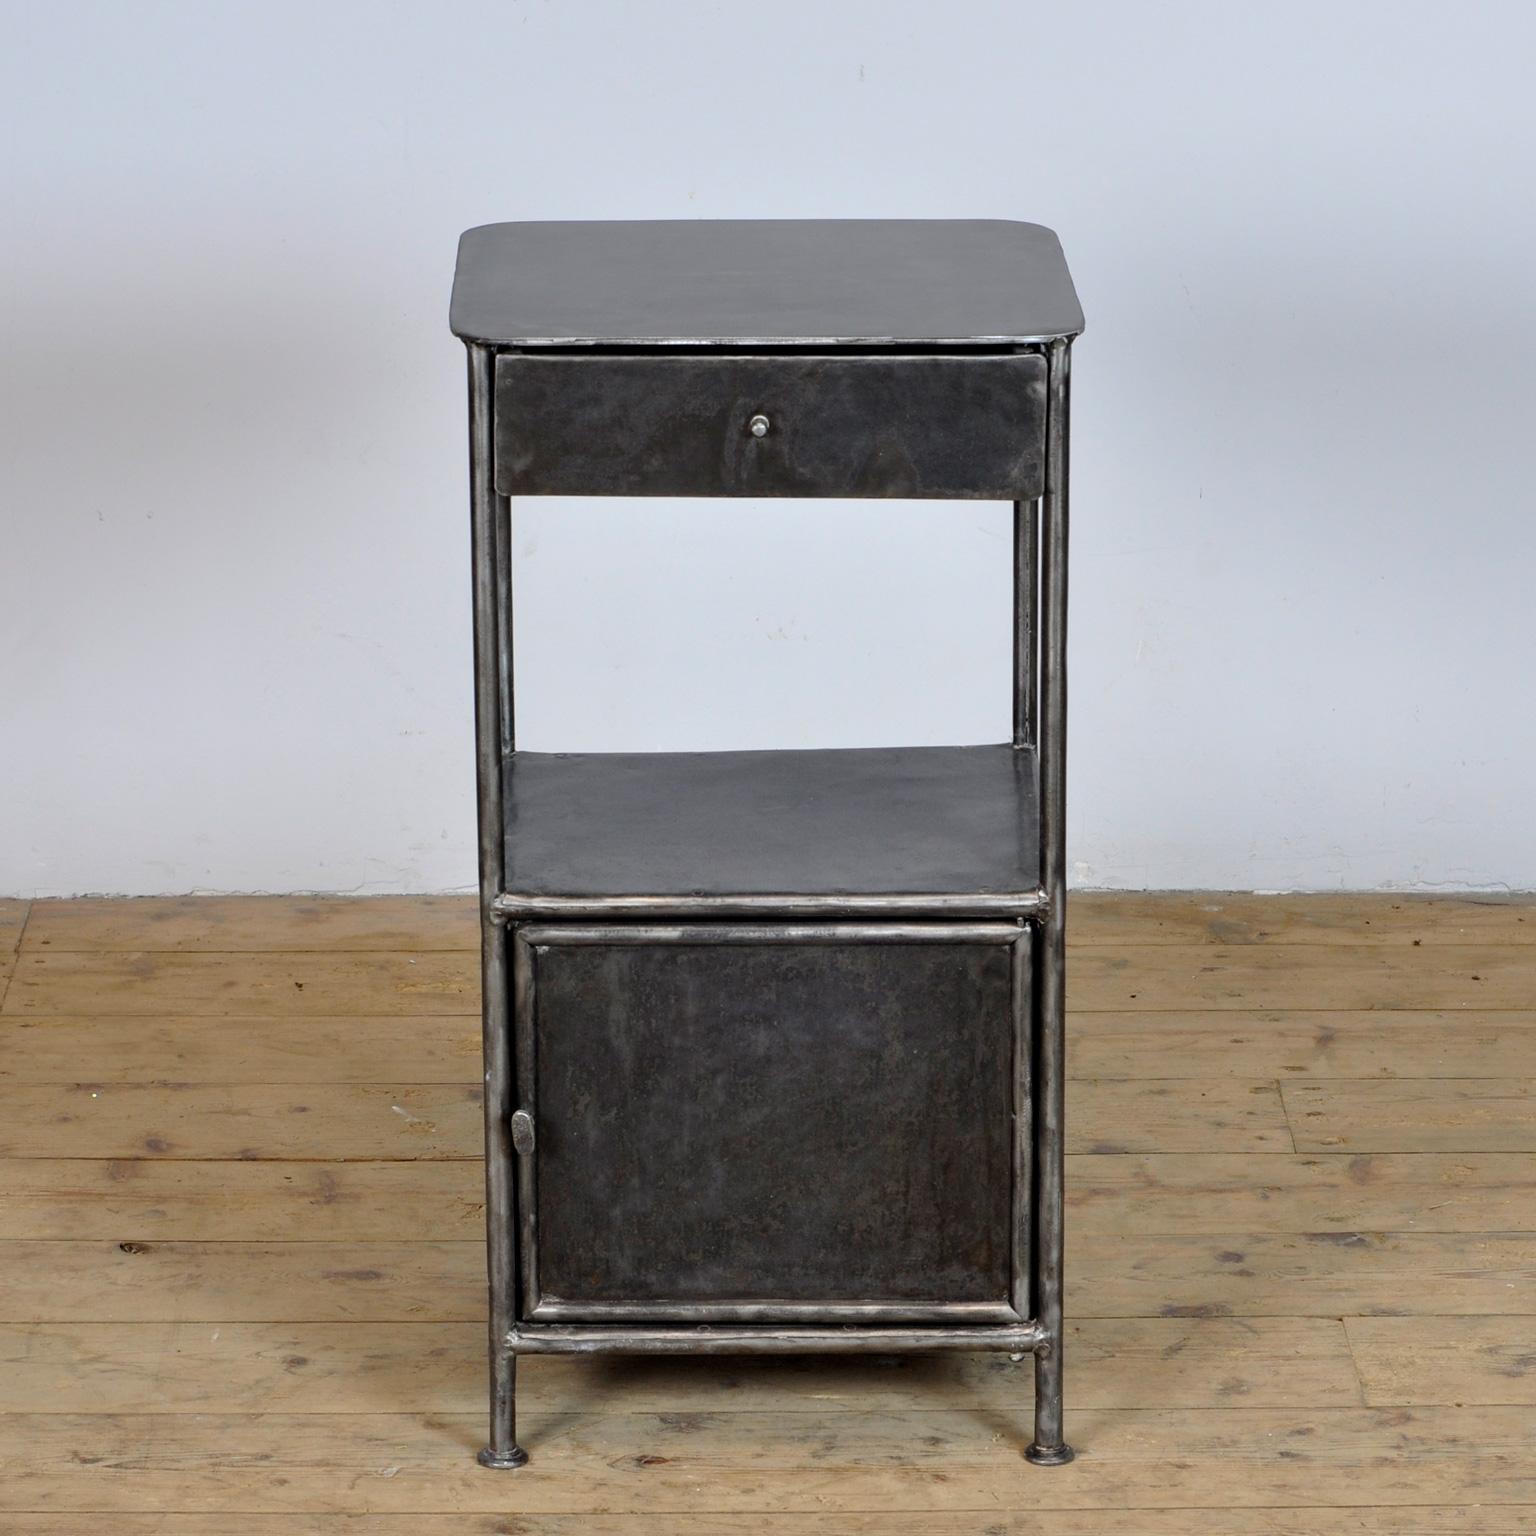 Polished iron hospital bedside cabinet. Produced in the 1910's in Germany.
     